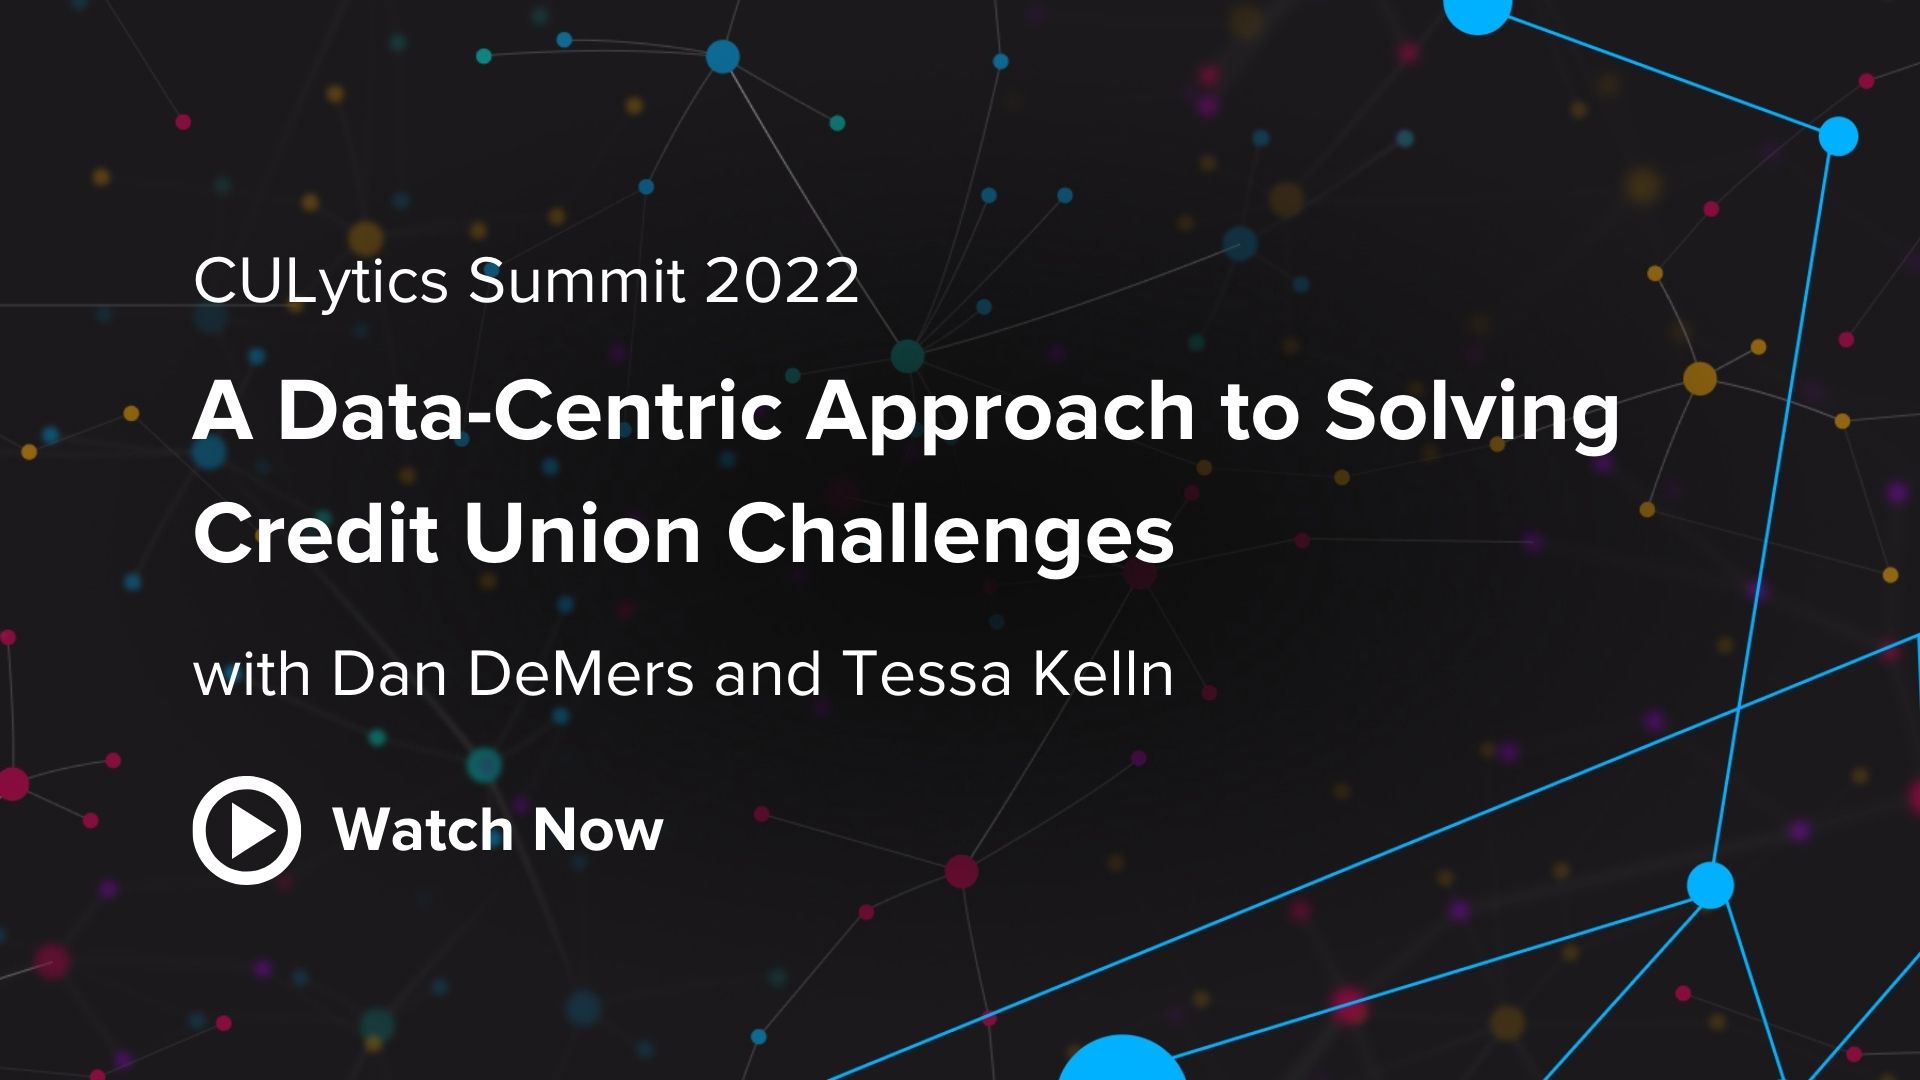 CULytics Session: A Data-Centric Approach to Solving Credit Union Challenges